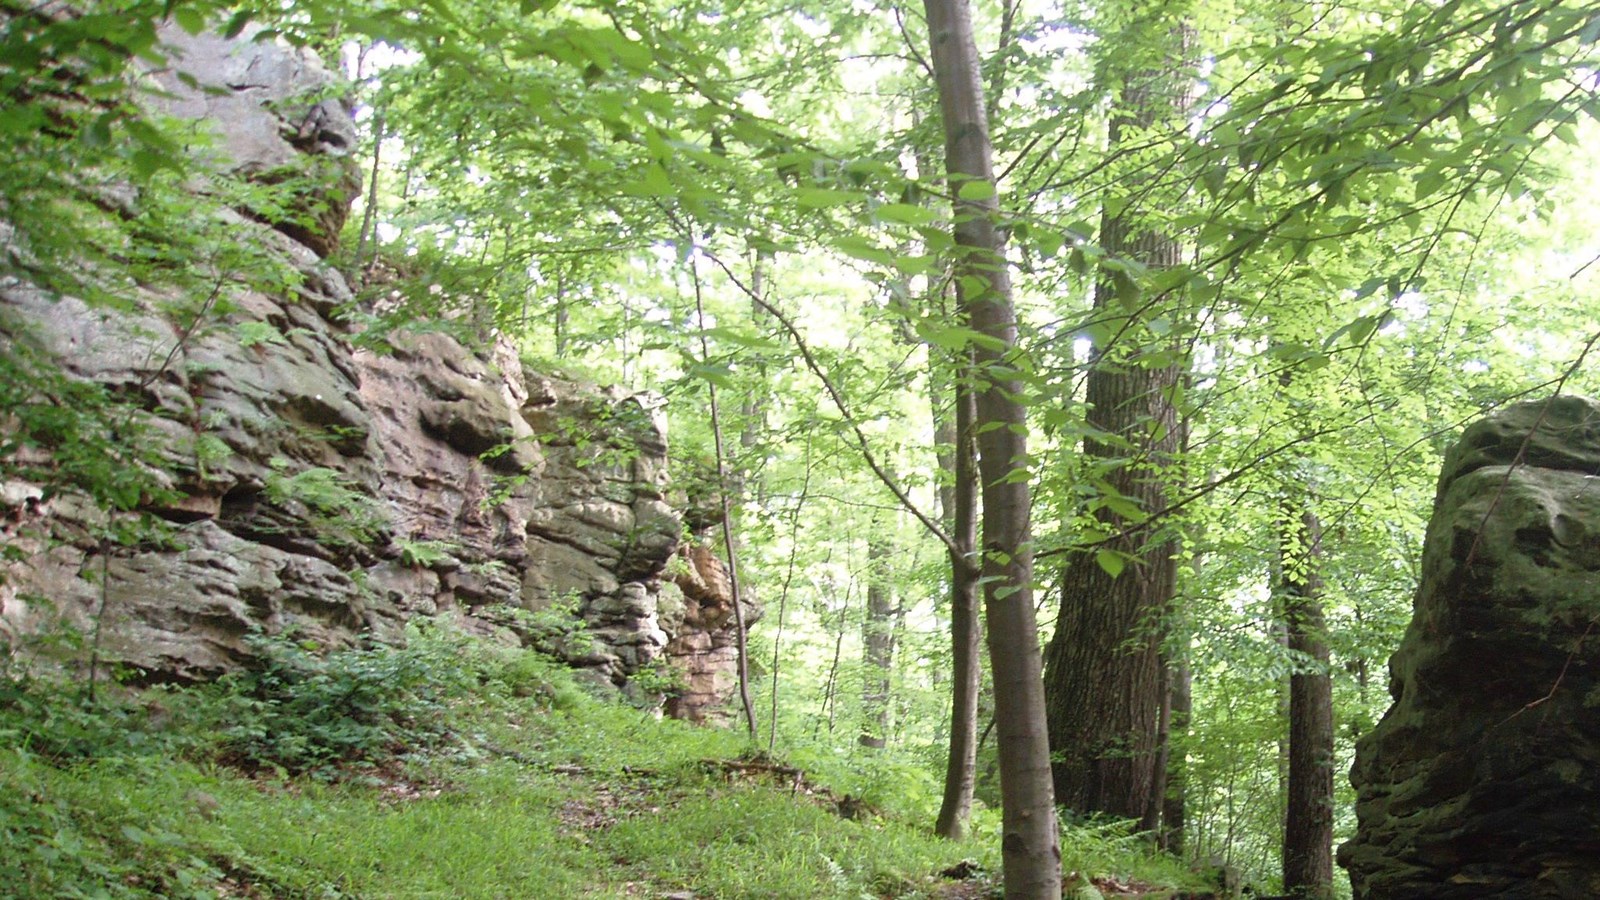 A wooded location with rocky cliff.